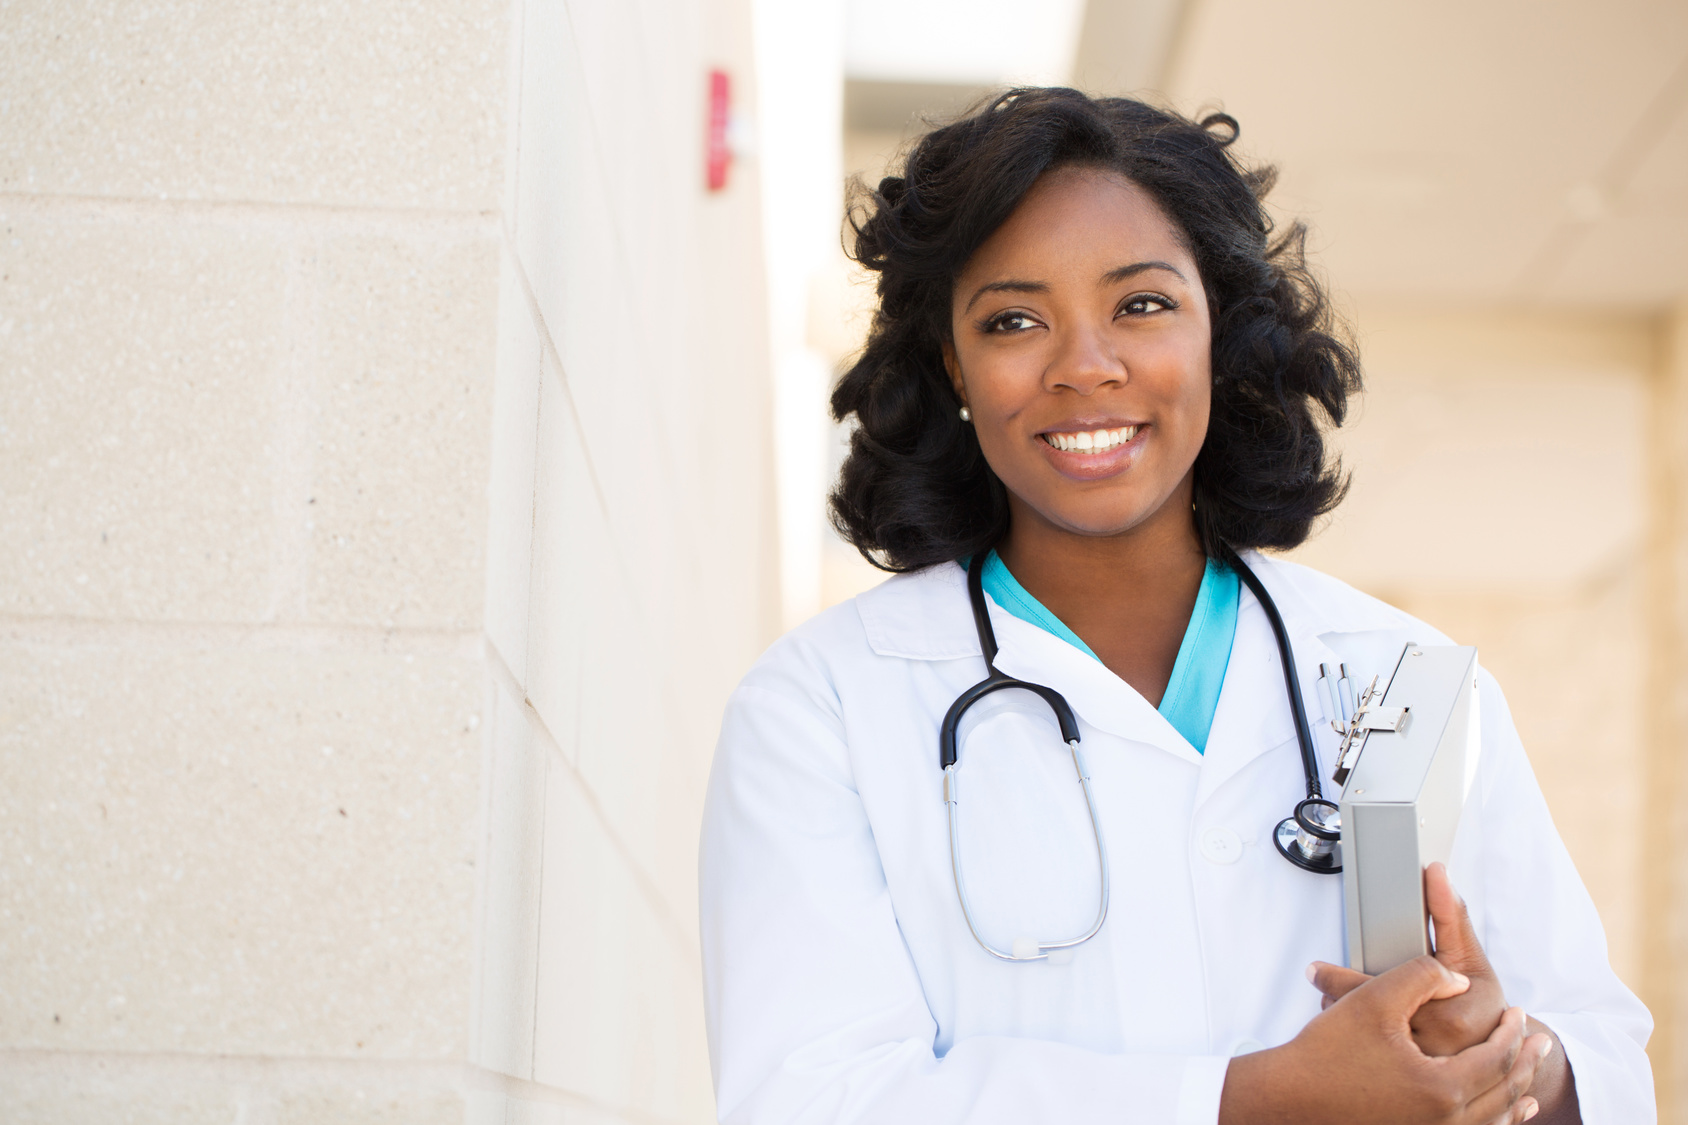 More Nurse Practitioners Now Pursue Residency Programs To Hone Skills